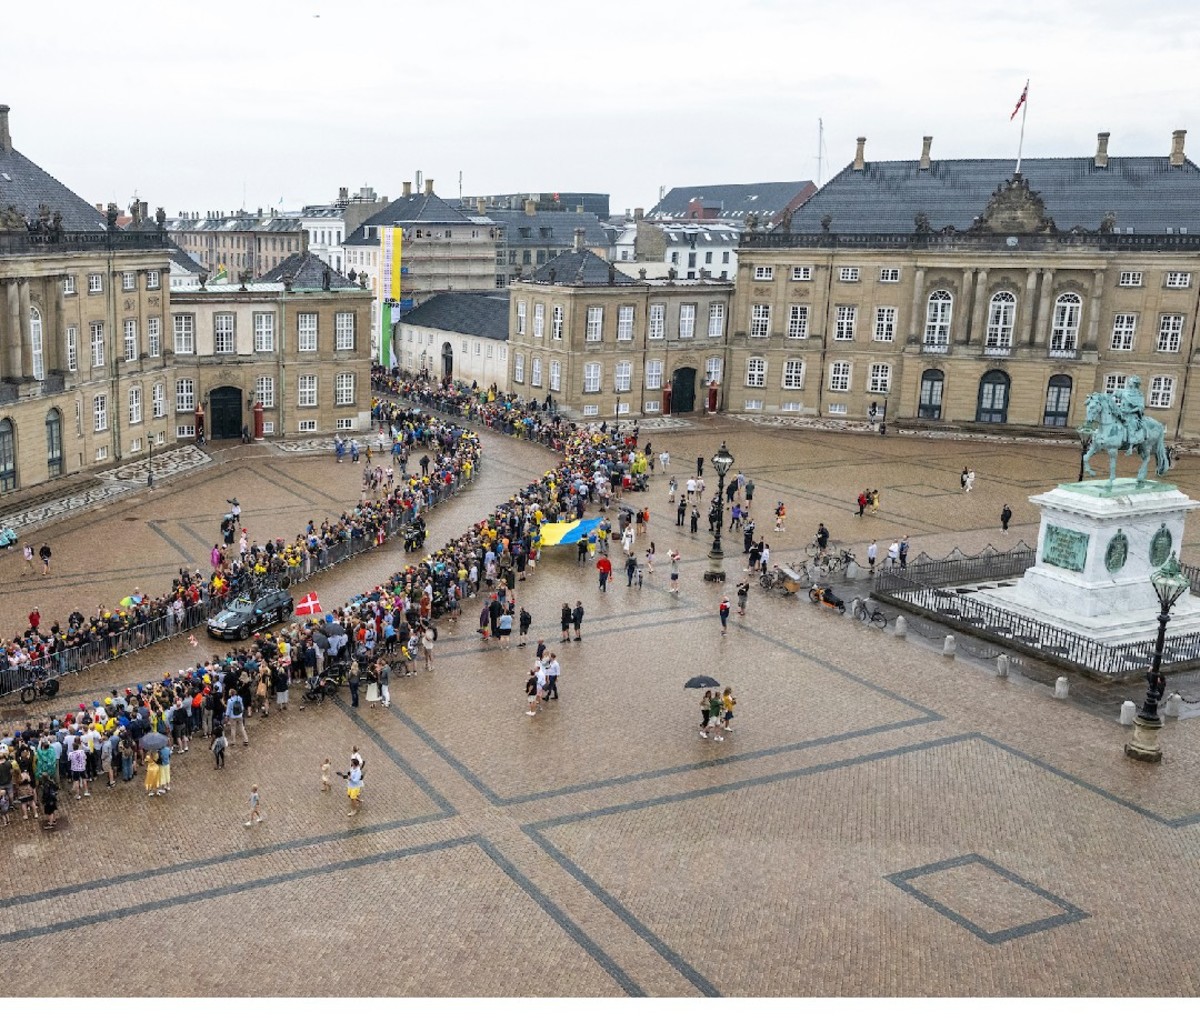 Cycling crowds gather in a historic square in Denmark during the 2022 Tour de France